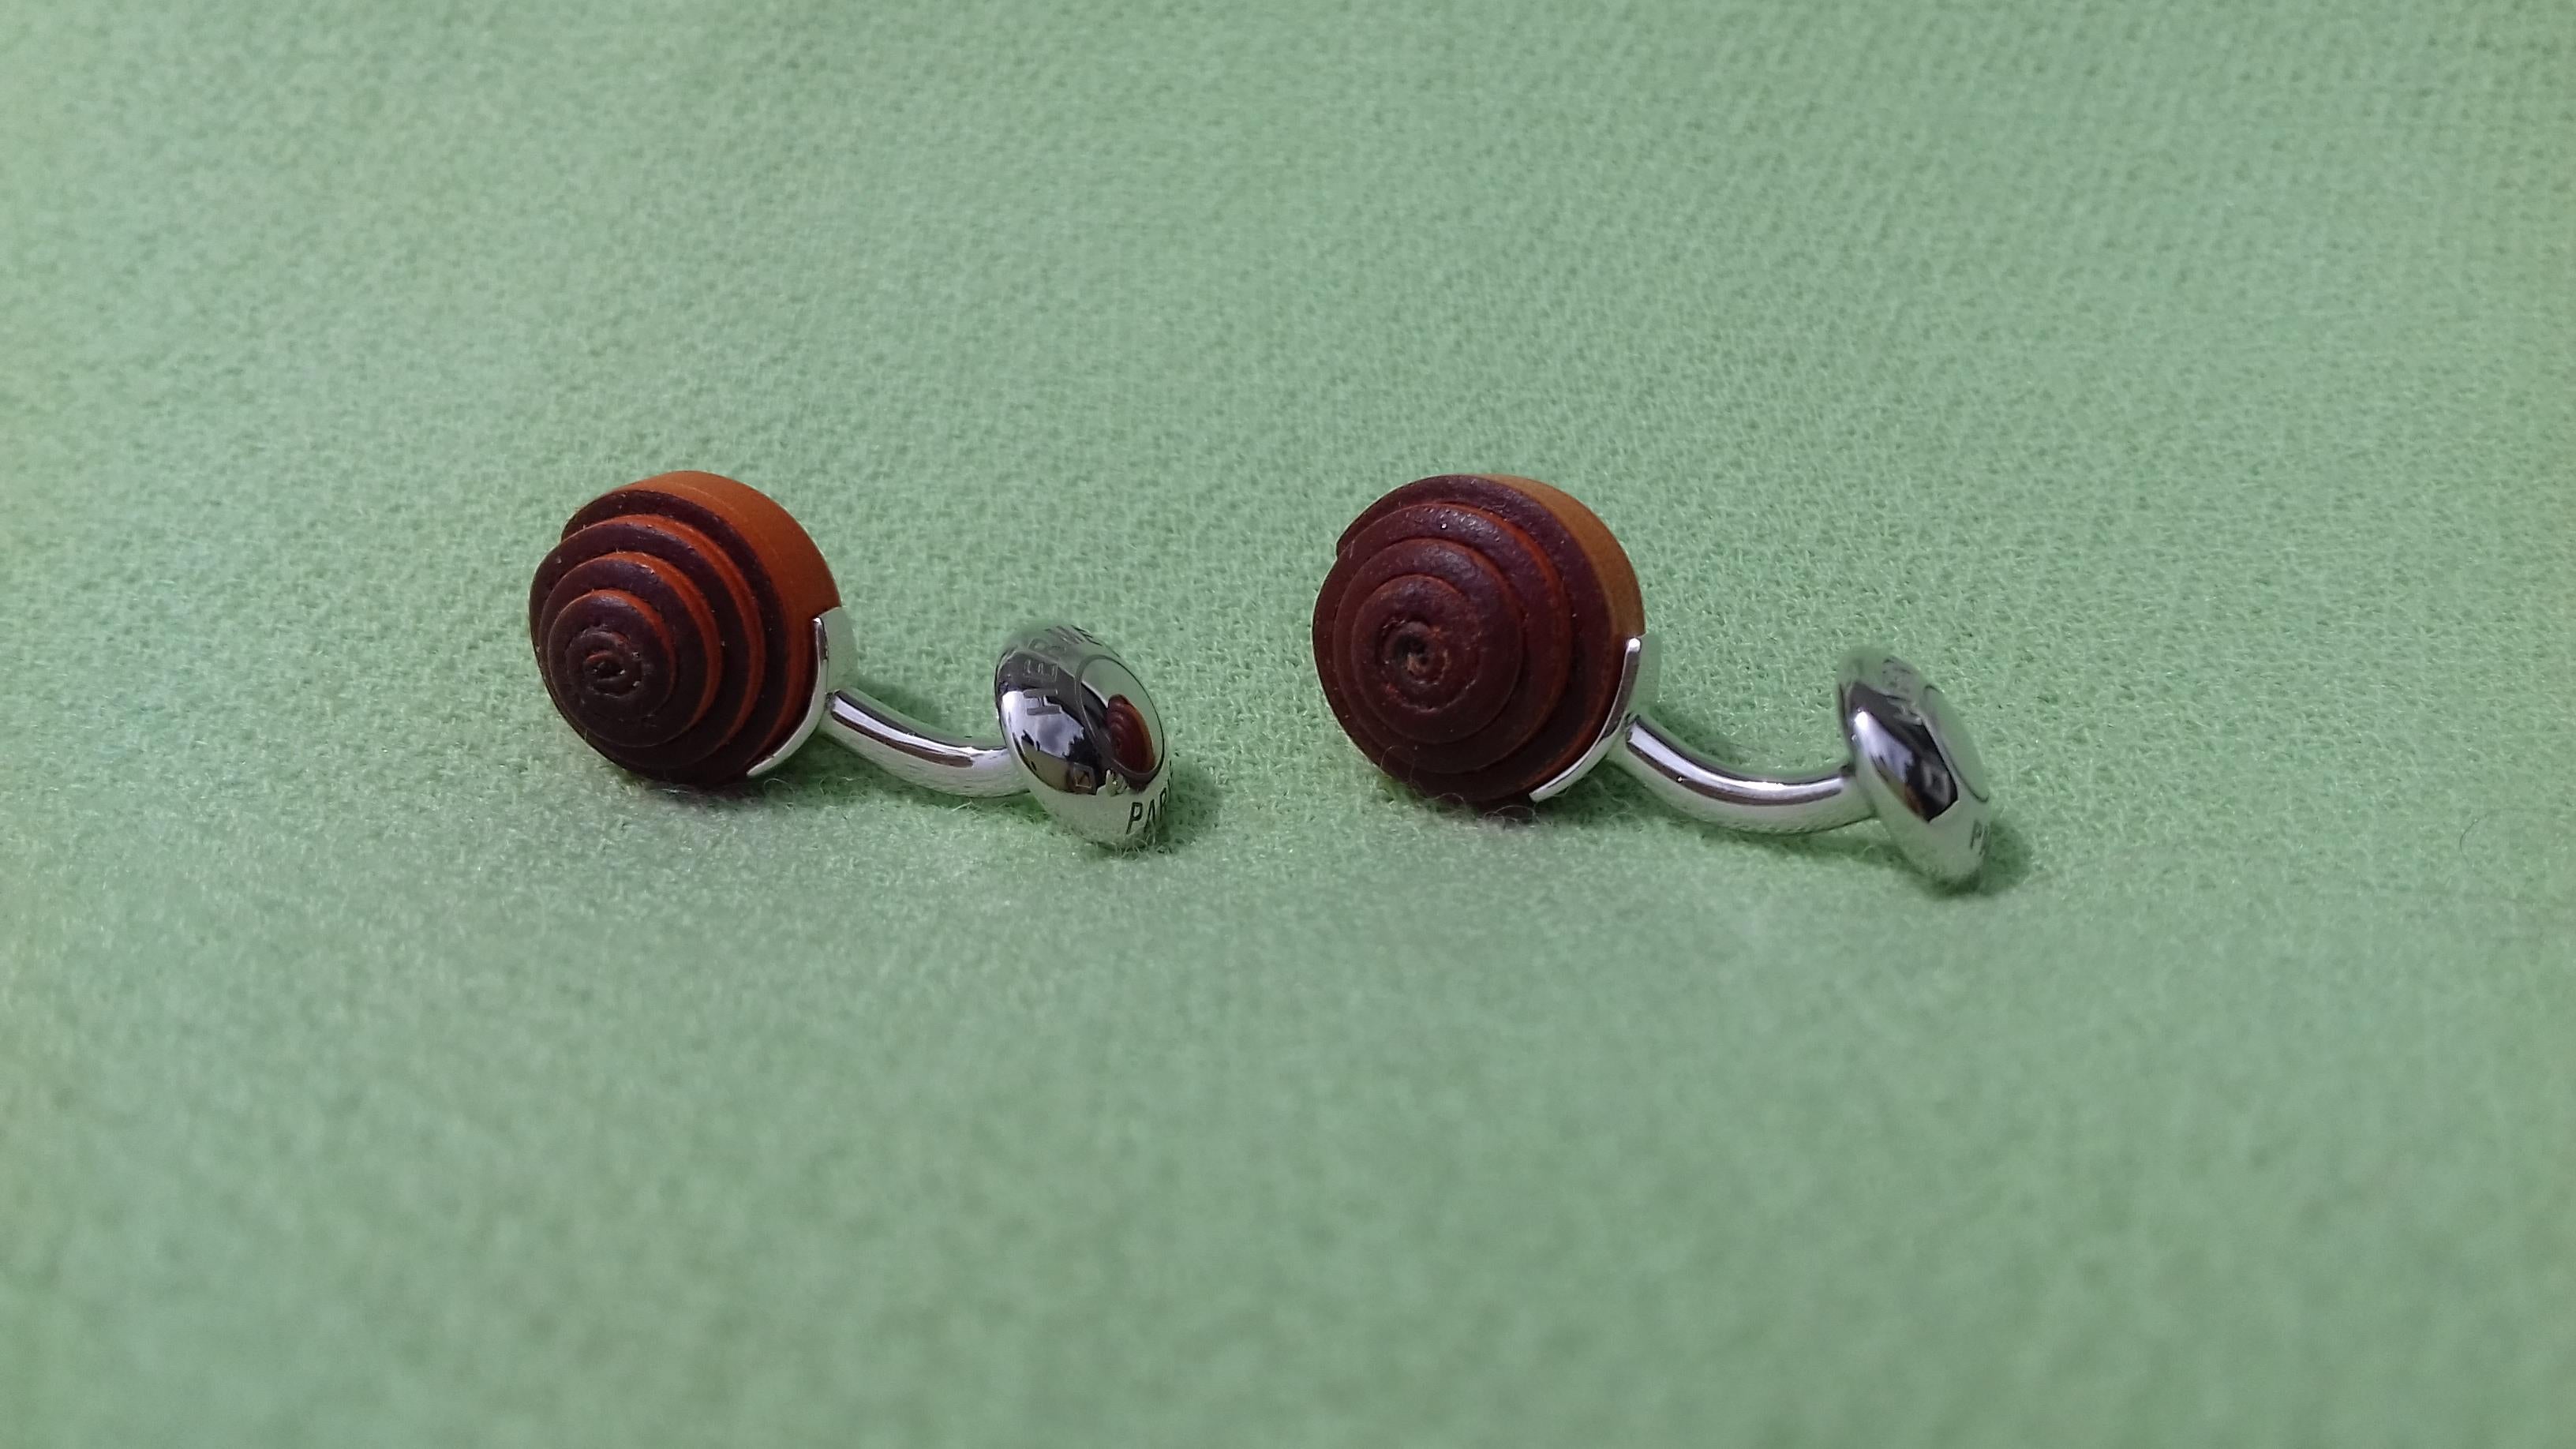 Hermès Coiled Leather and Sterling Silver Cuffs Button Snail Shaped Cufflinks  2